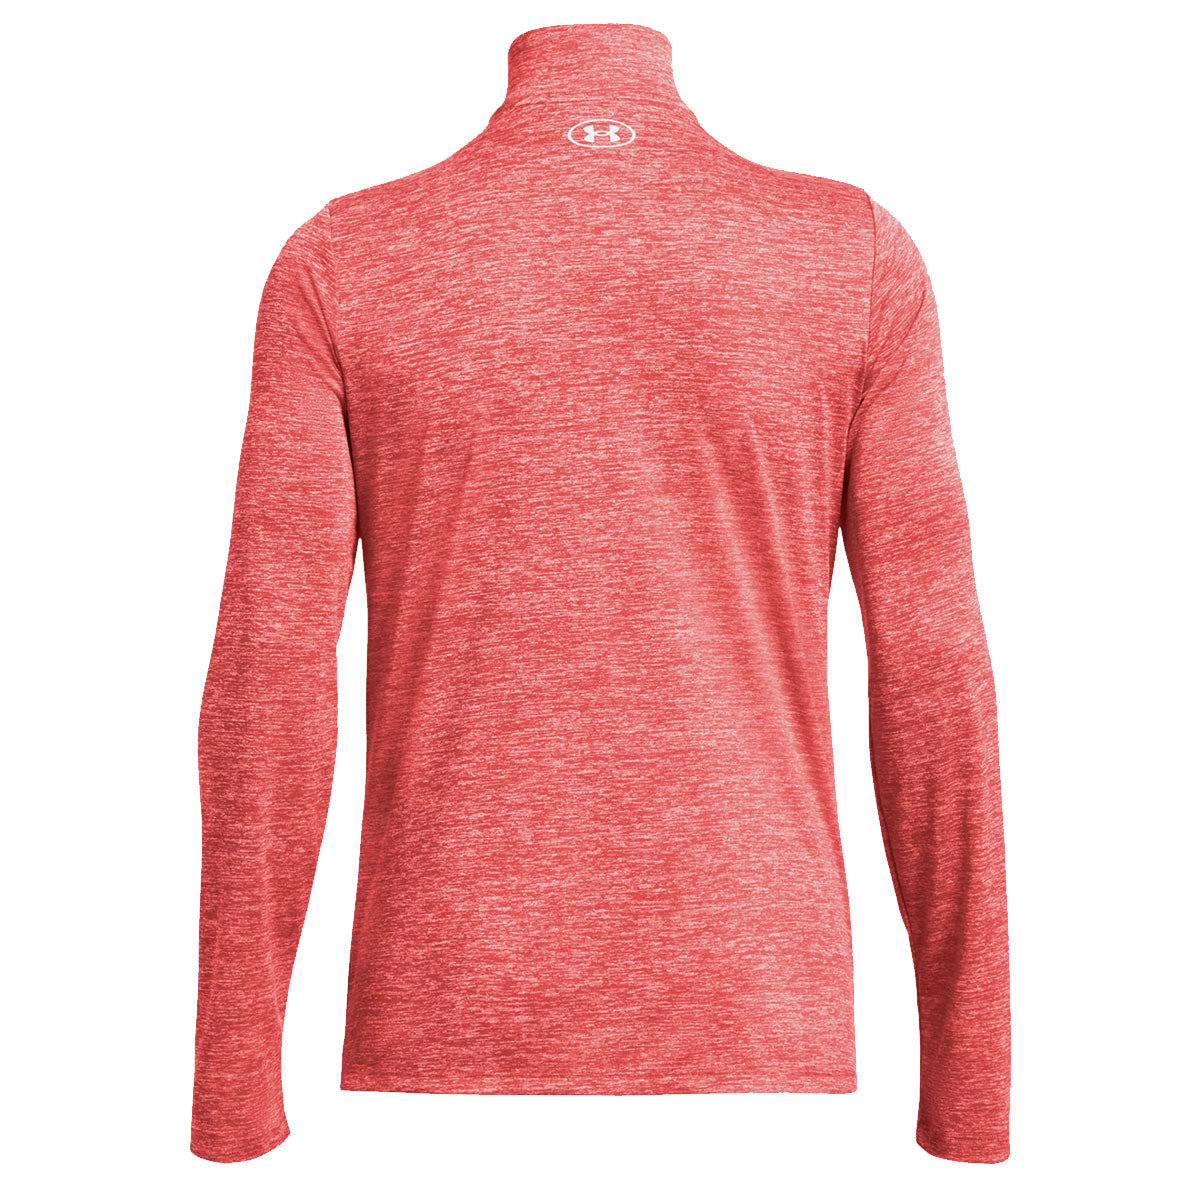 Under Armour Tech 1/2 Zip Twist Top - Womens - Red Solstice/White